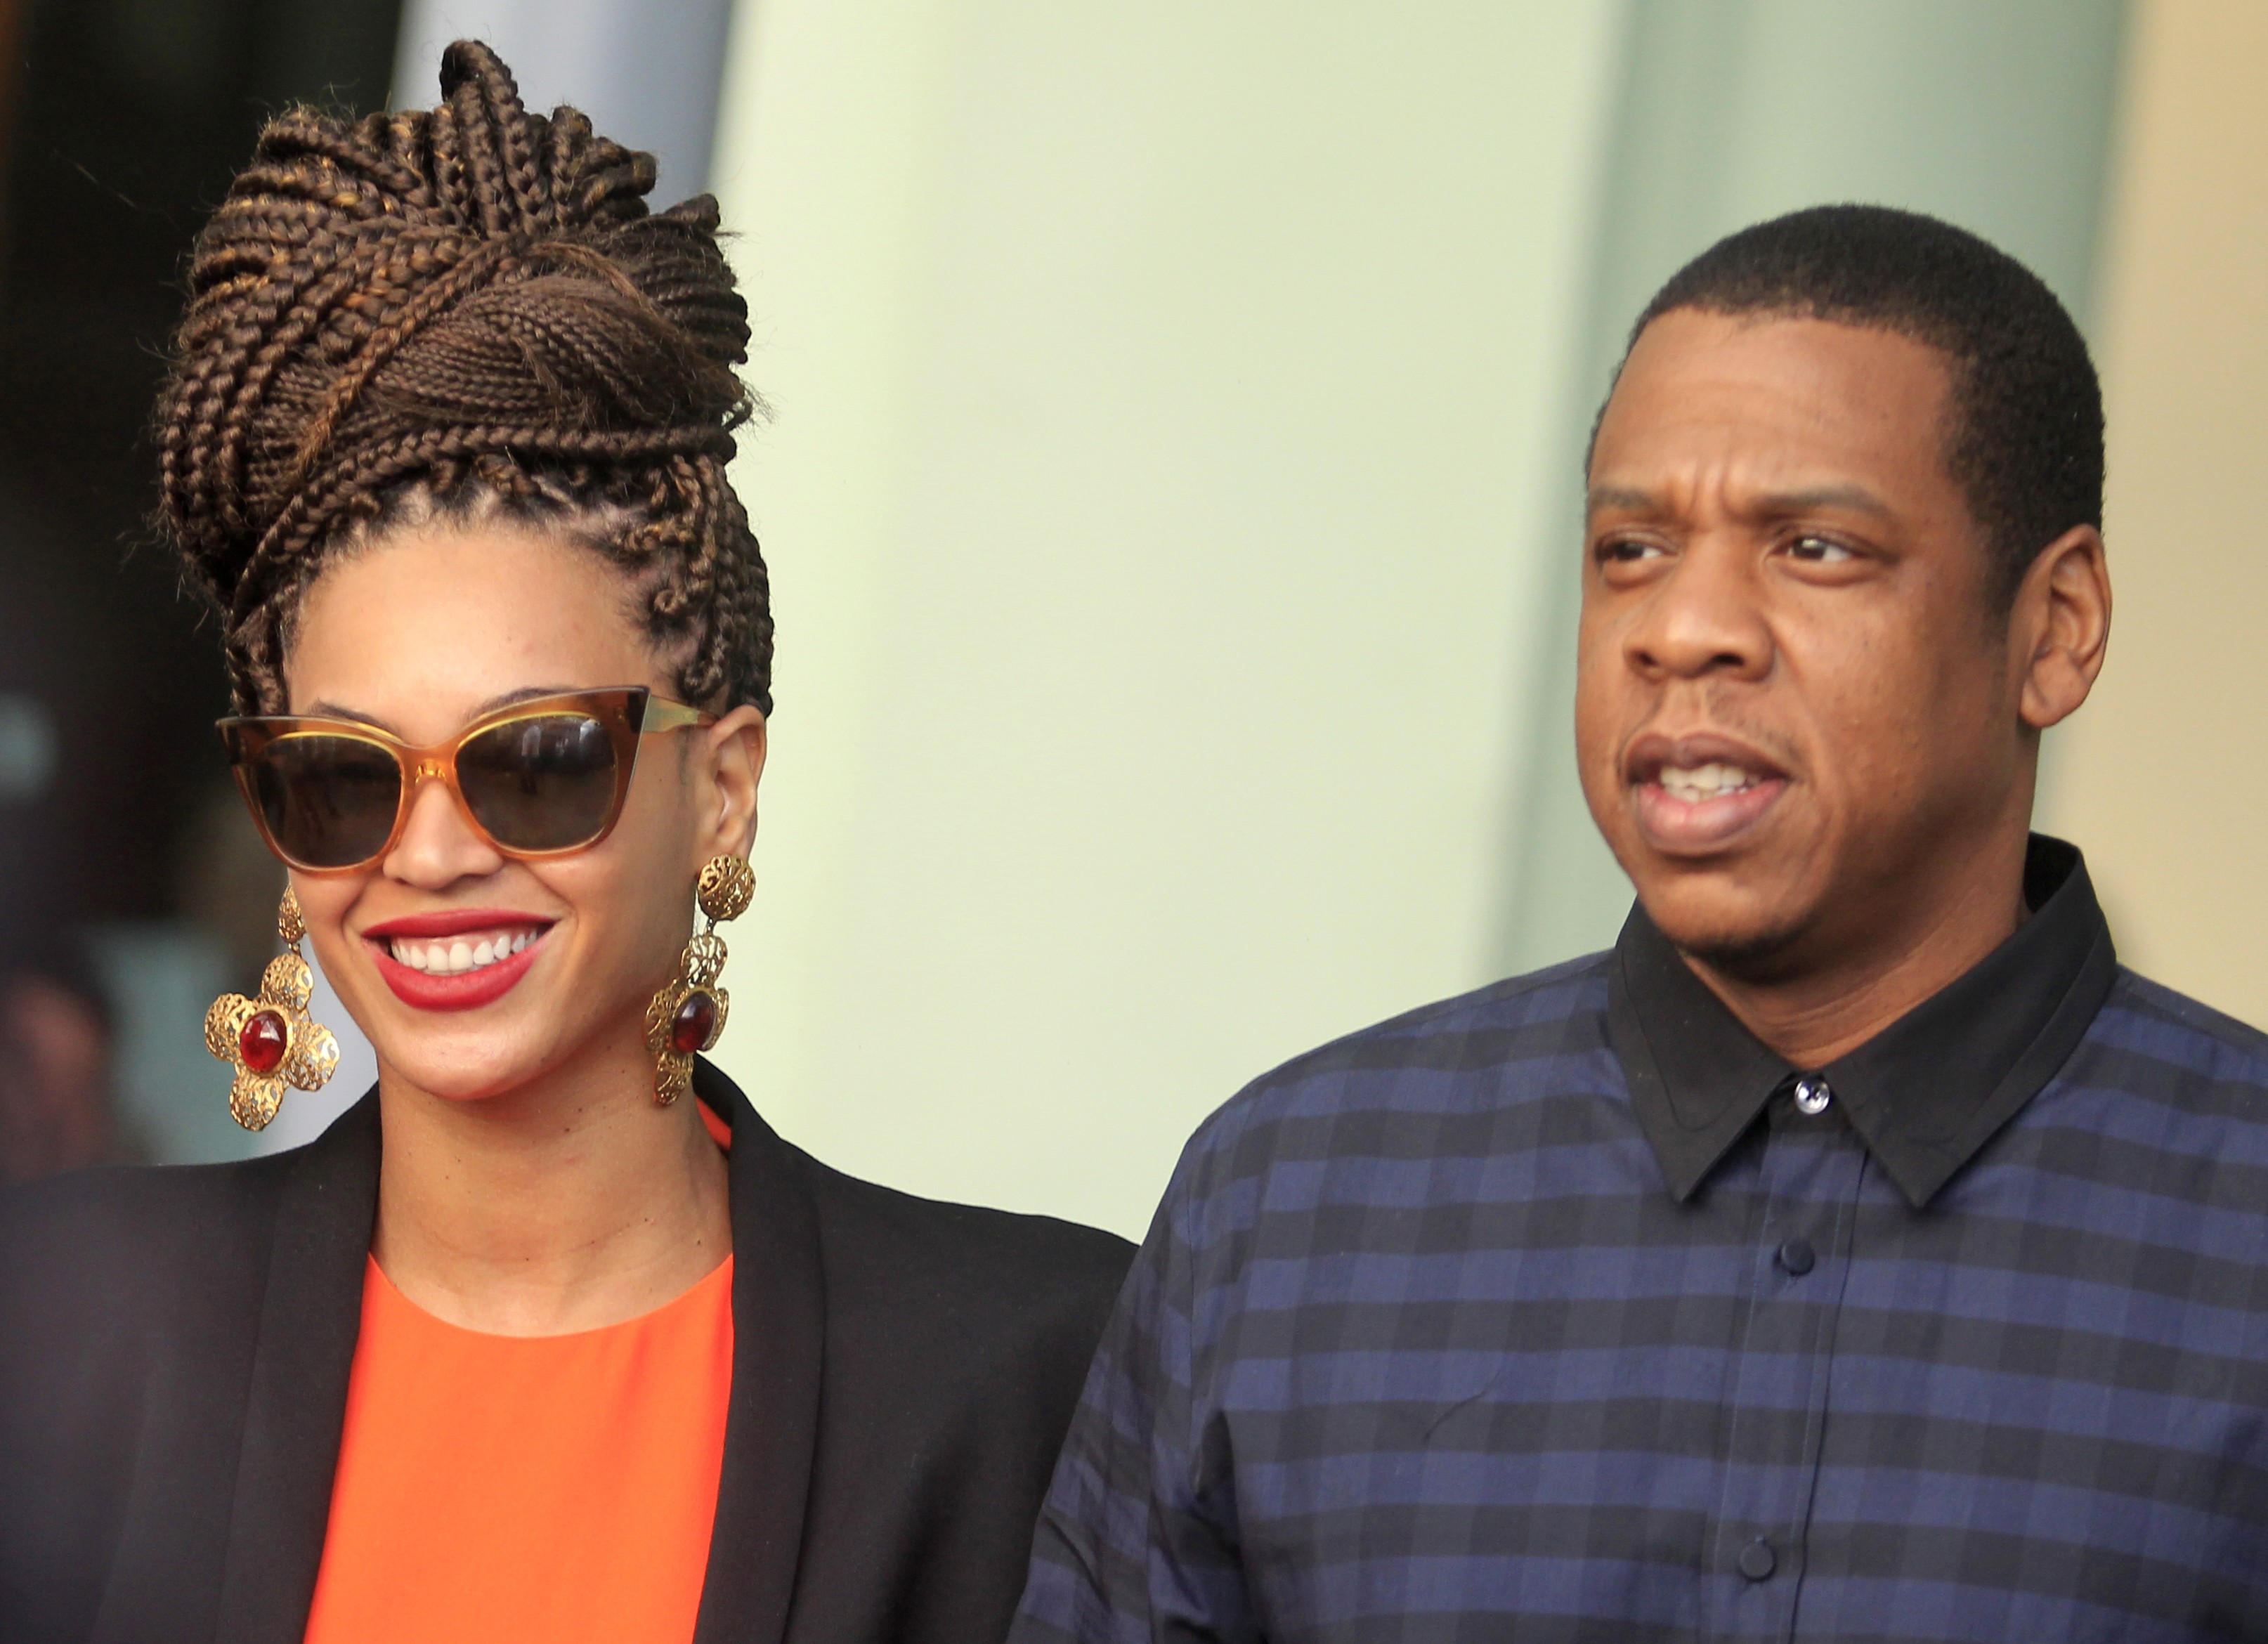 U.S. singer Beyonce and her husband rapper Jay-Z walk as they leave their hotel in Havana on April 4, 2013.